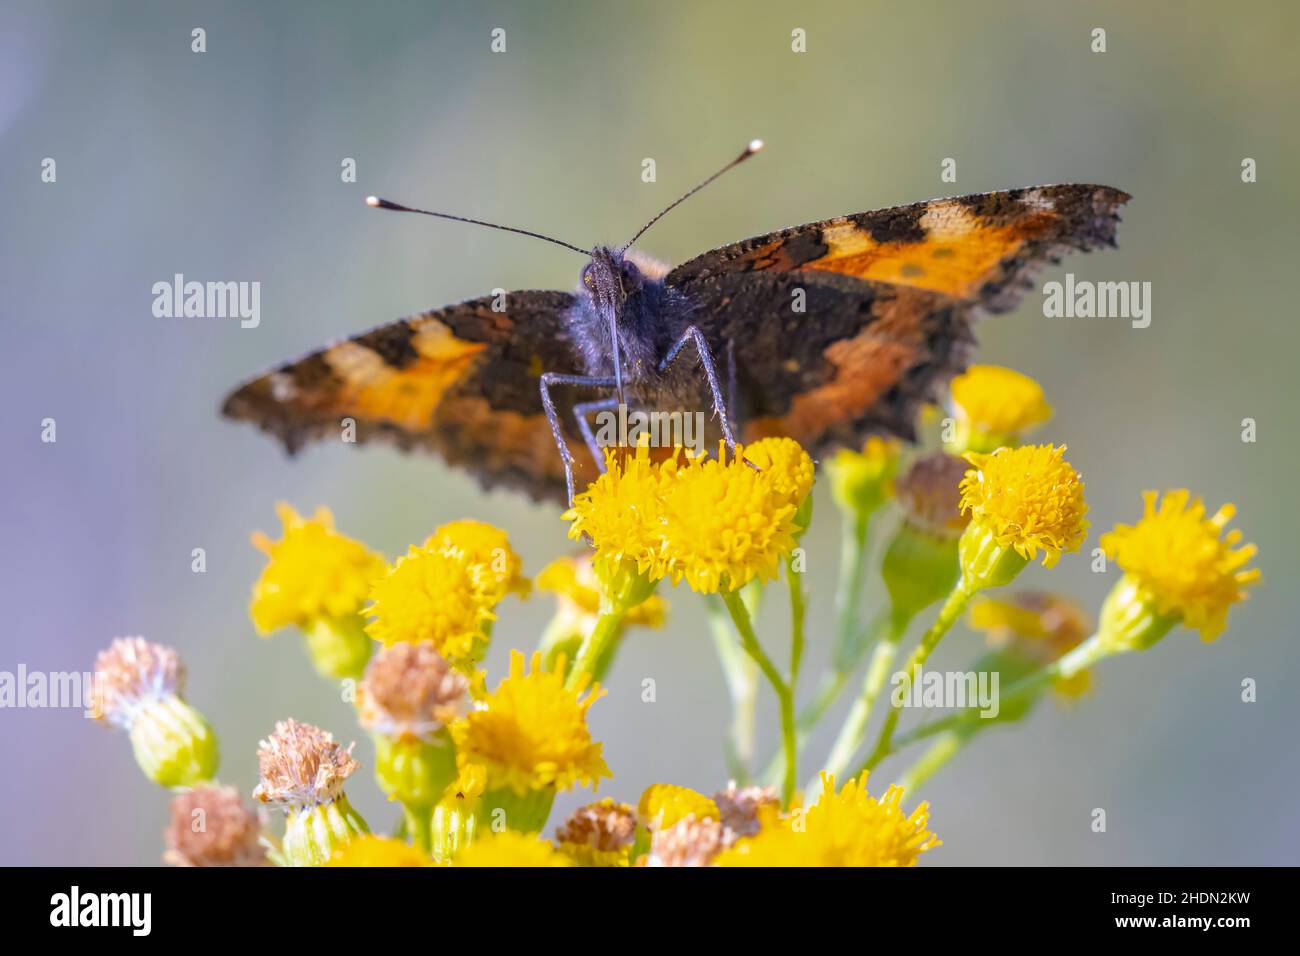 Close-up of the small tortoiseshell Aglais urticae butterfly pollinating yellow flowers. Isolated by nature Stock Photo